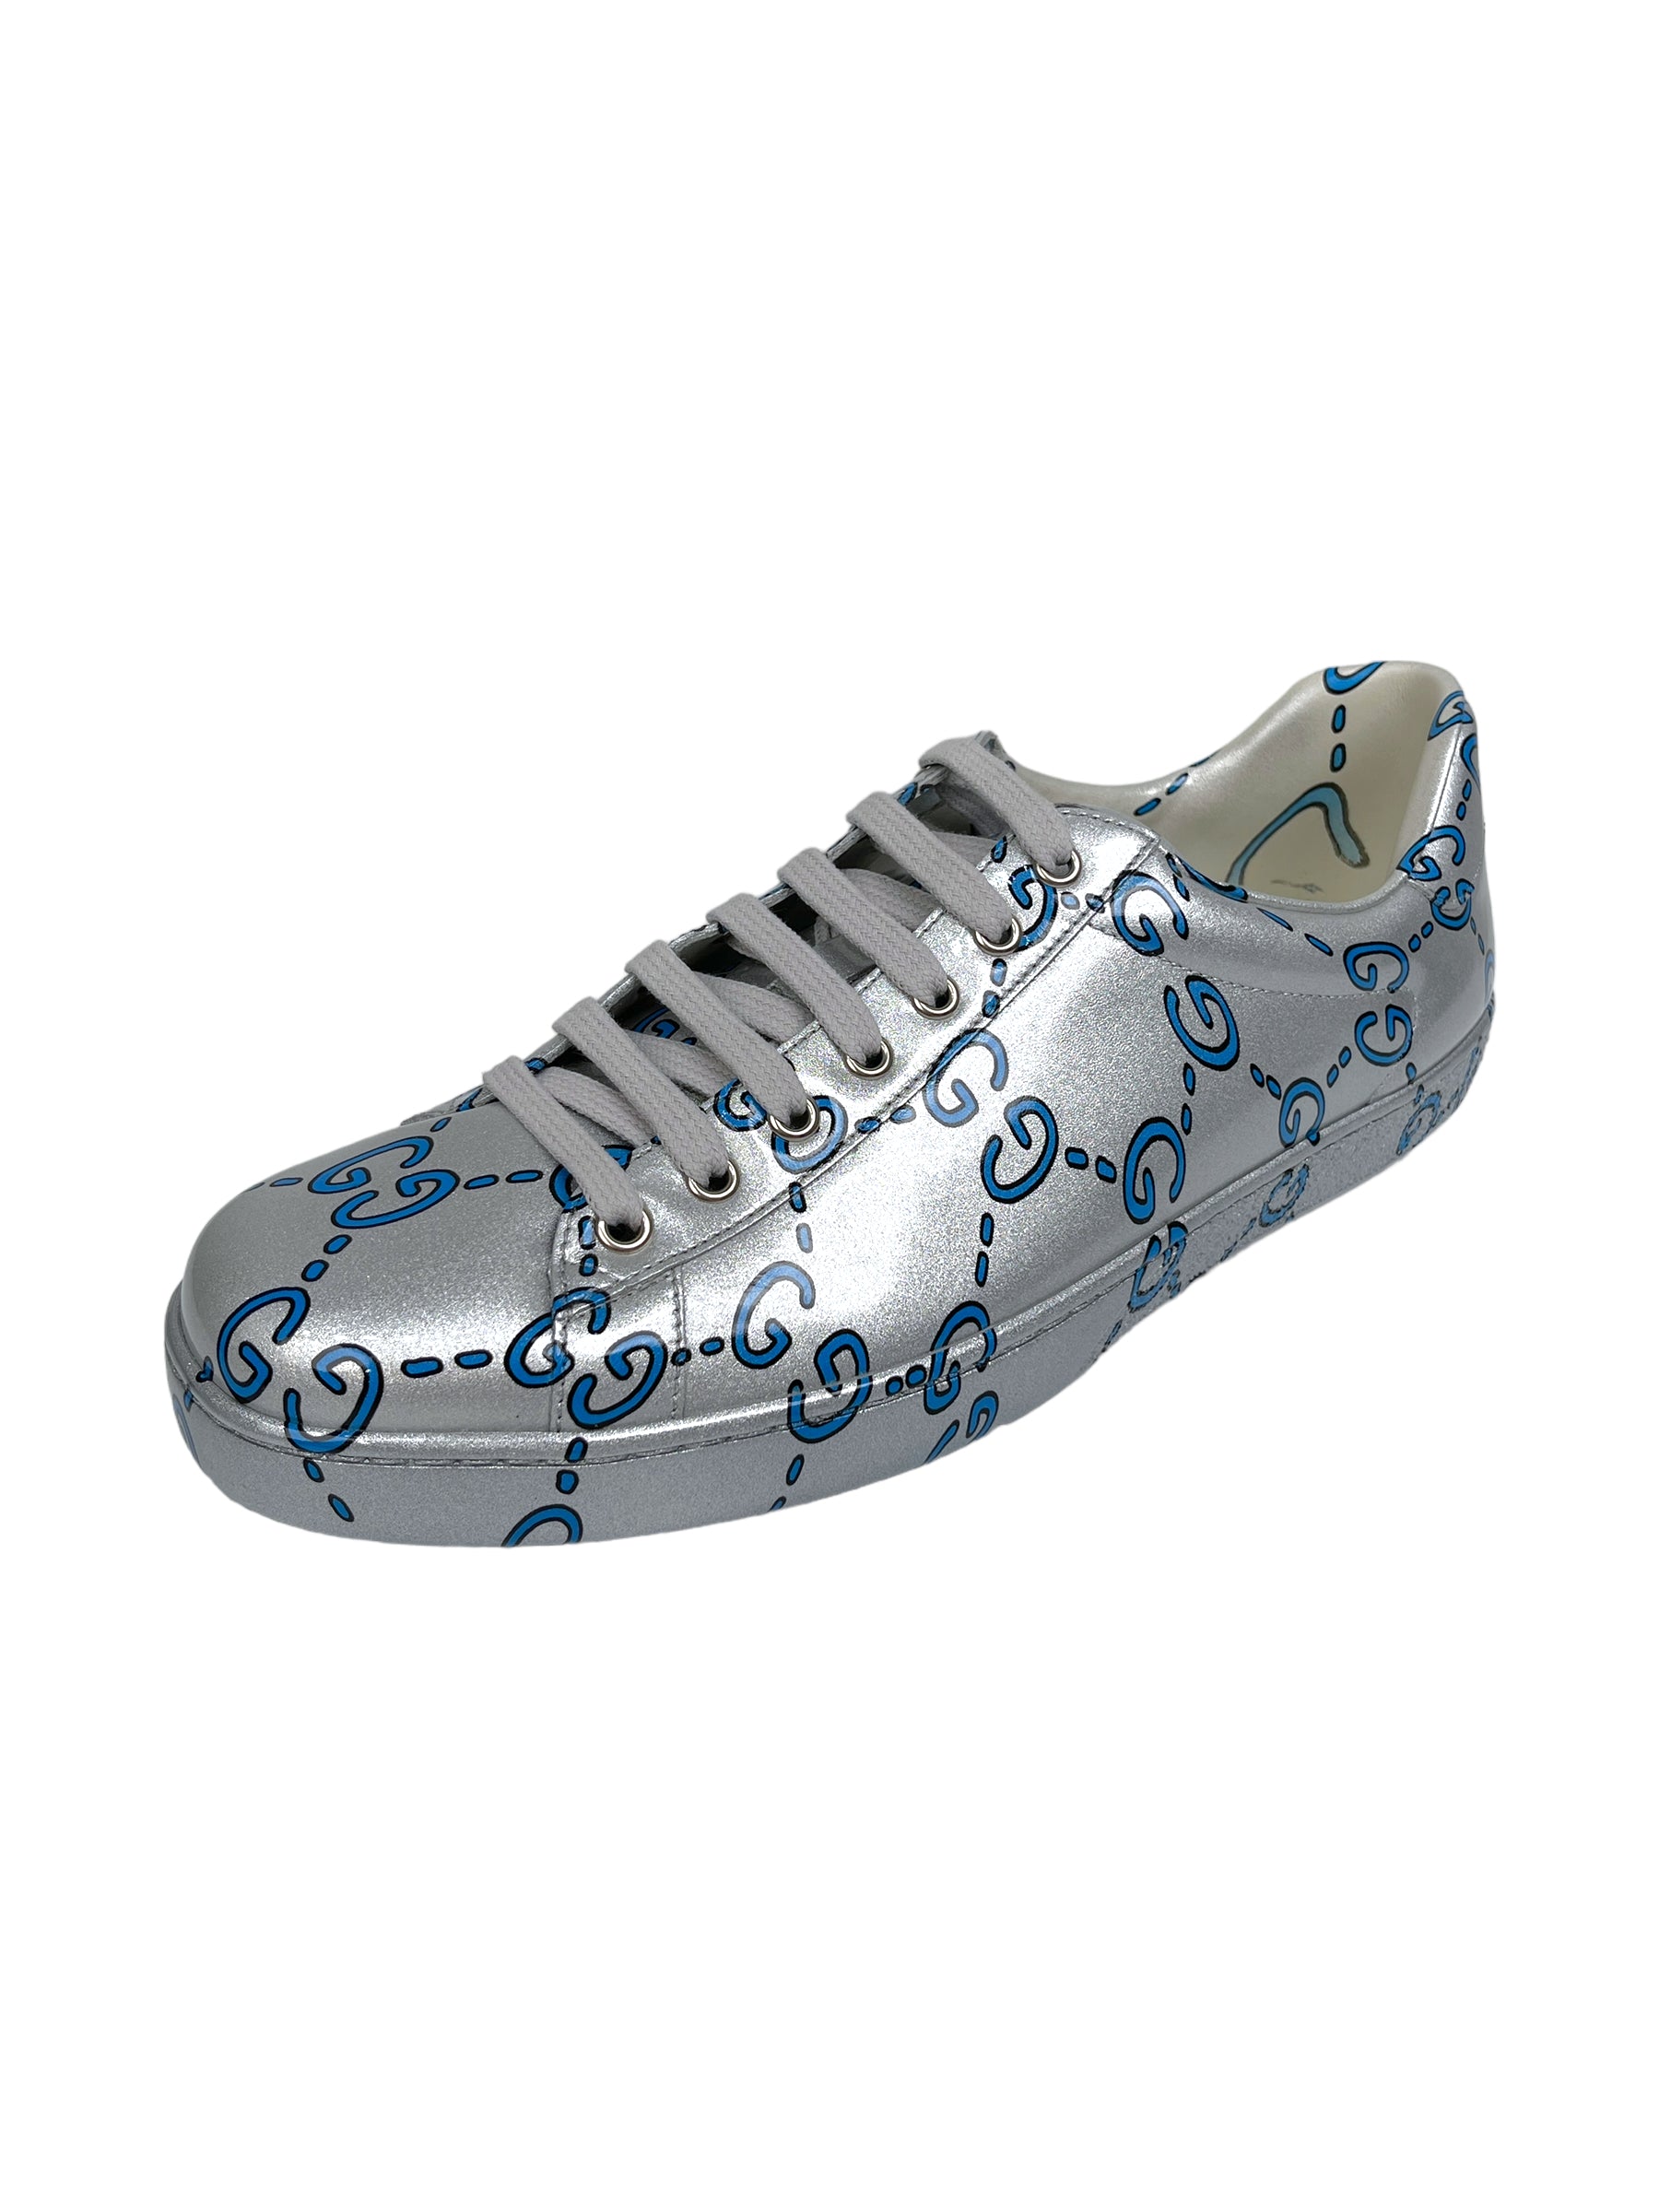 Gucci Silver & Blue Ghost GG Monogram Ace Sneakers — Genuine Design luxury consignment Calgary, Alberta, Canada New and pre-owned clothing, shoes, accessories.